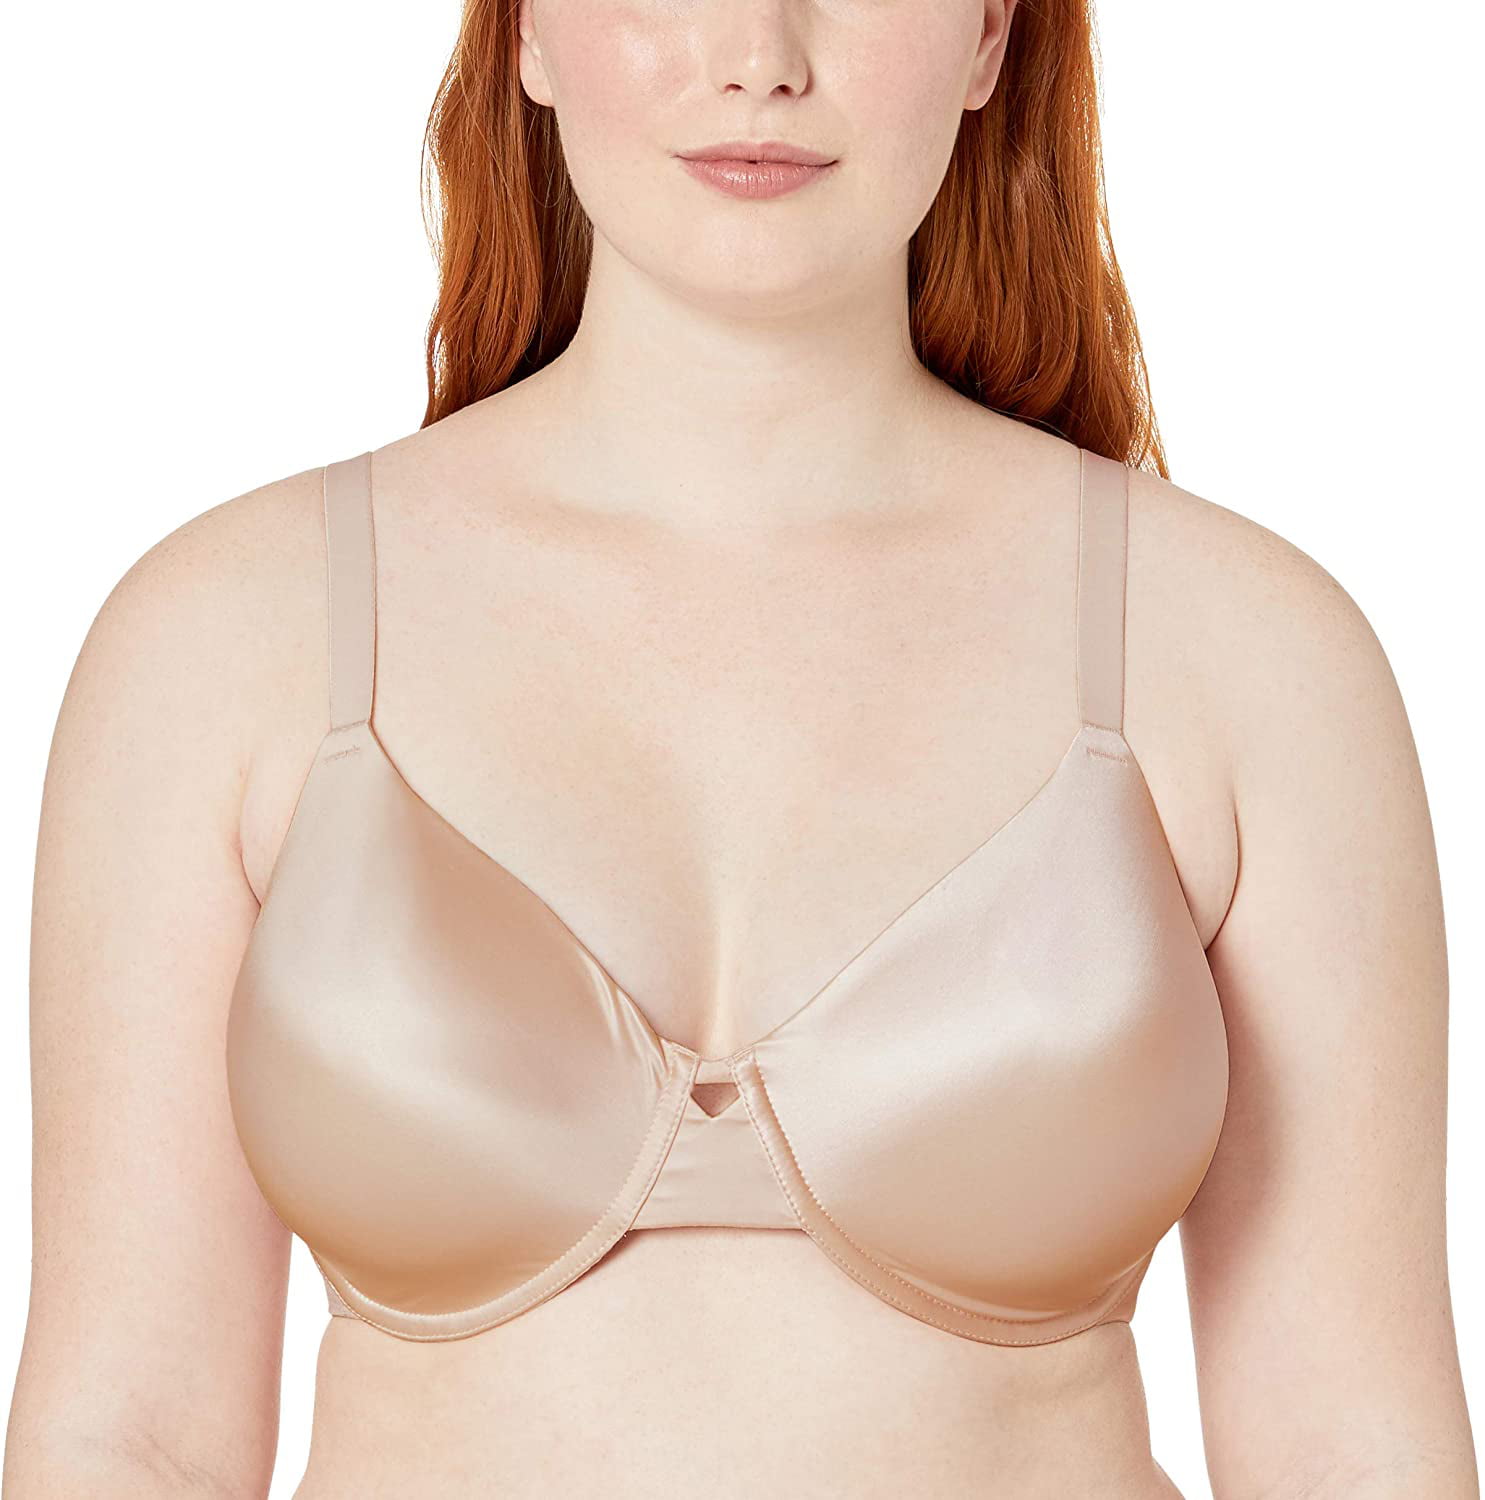 Ava Loves Nude Cleavage Enhancement with support Sizes 22 24 